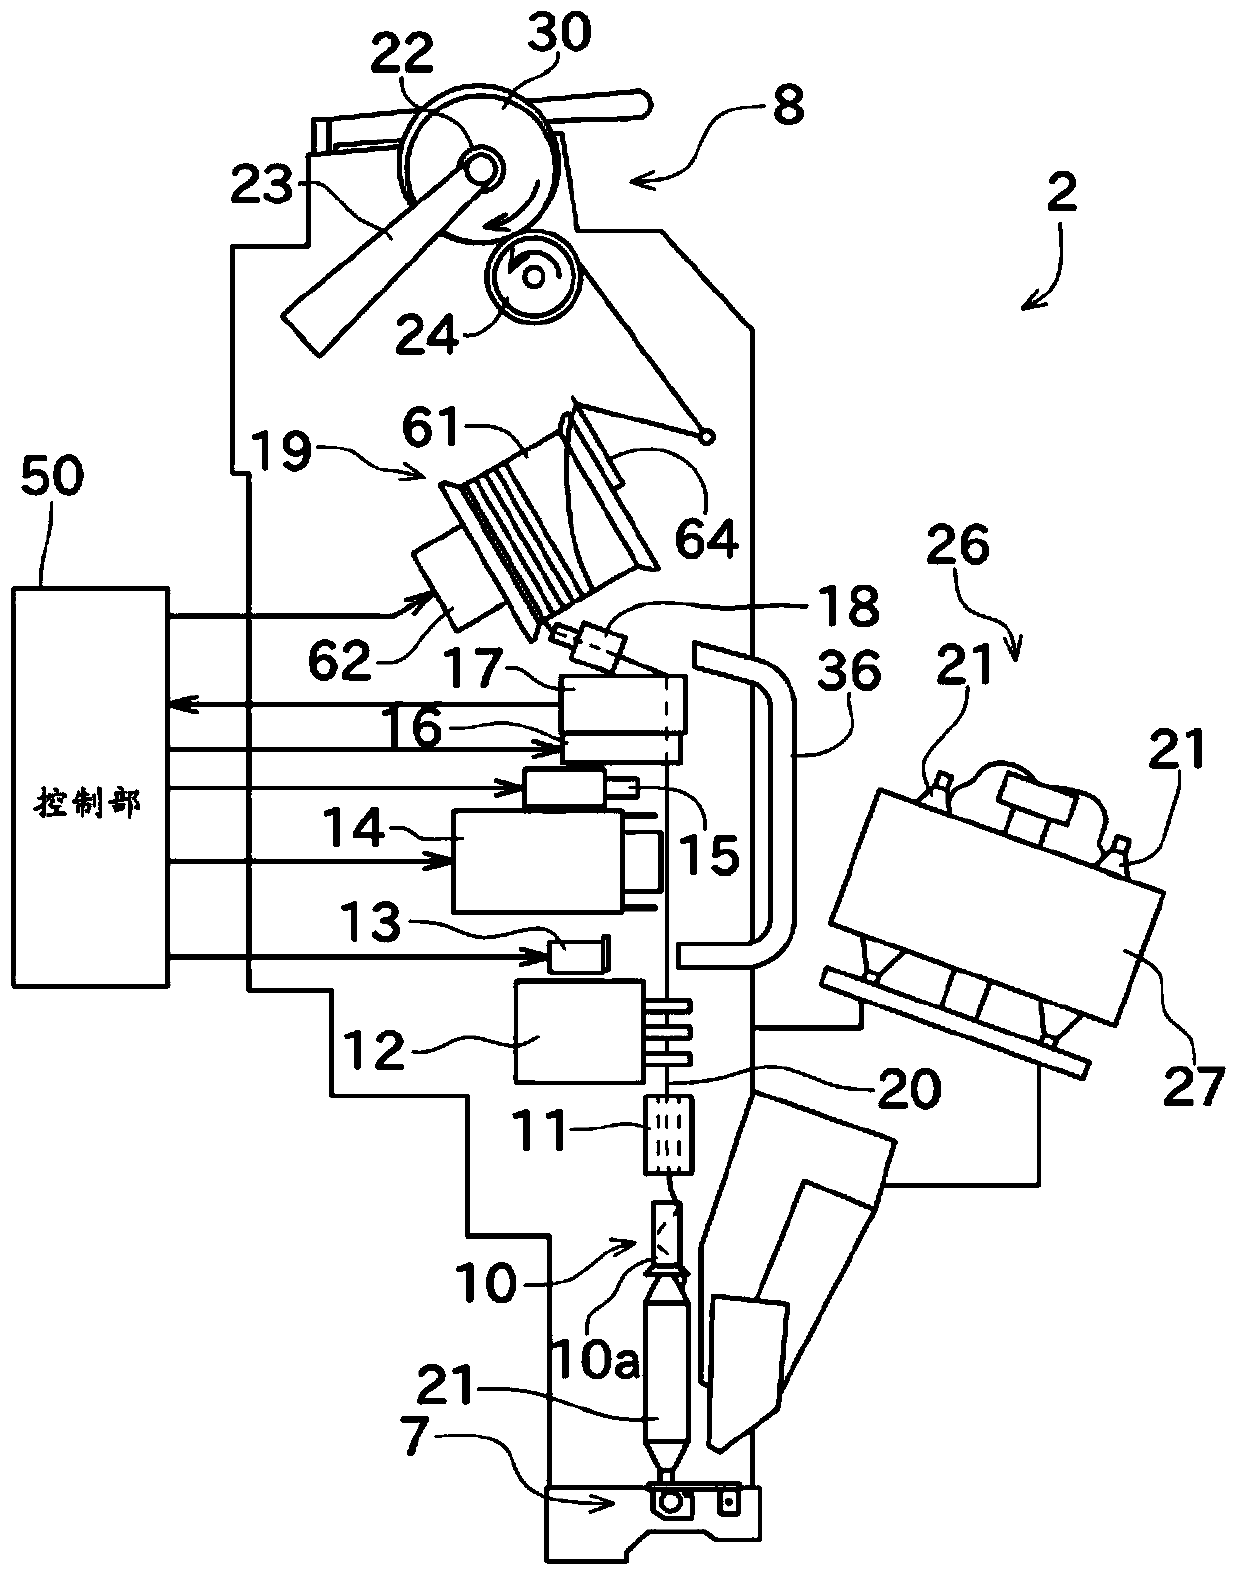 Tension imparting member, yarn storage device, and yarn winding device